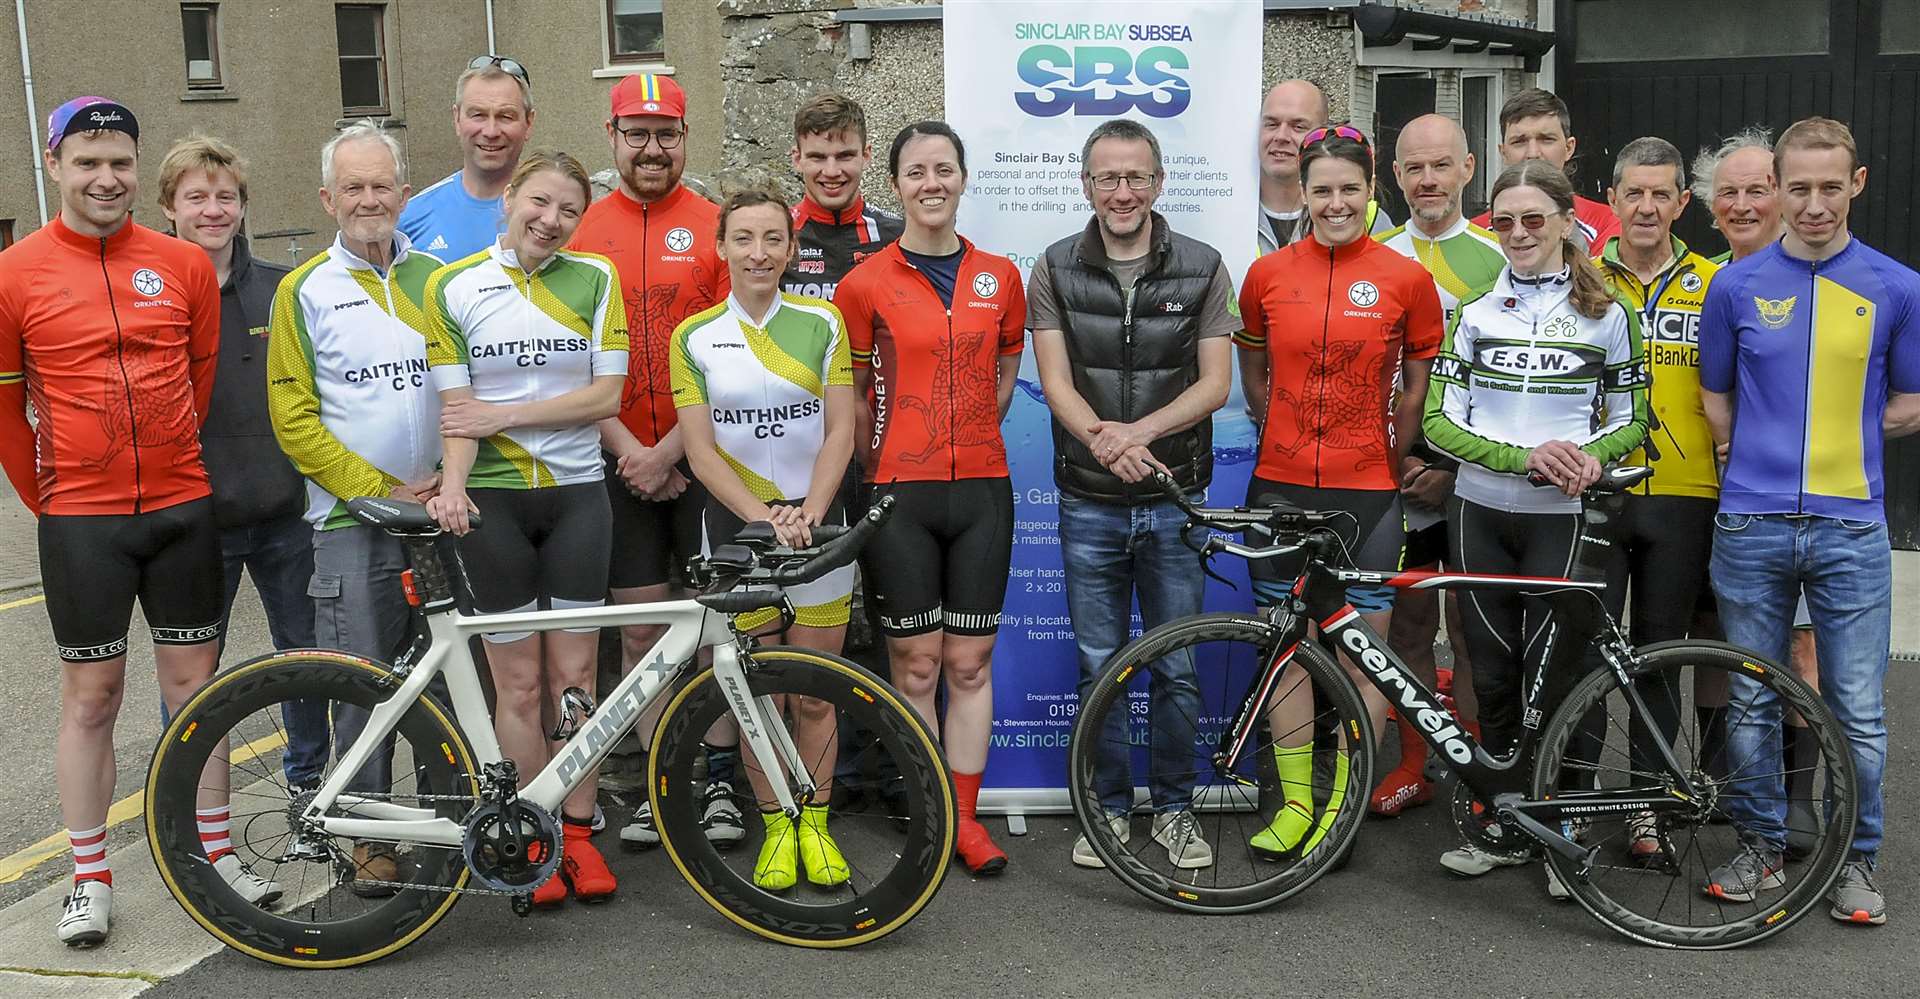 Competitors in the Caithness Festival of Cycling in 2019, promoted by Caithness Cycling Club and supported by Sinclair Bay Subsea.